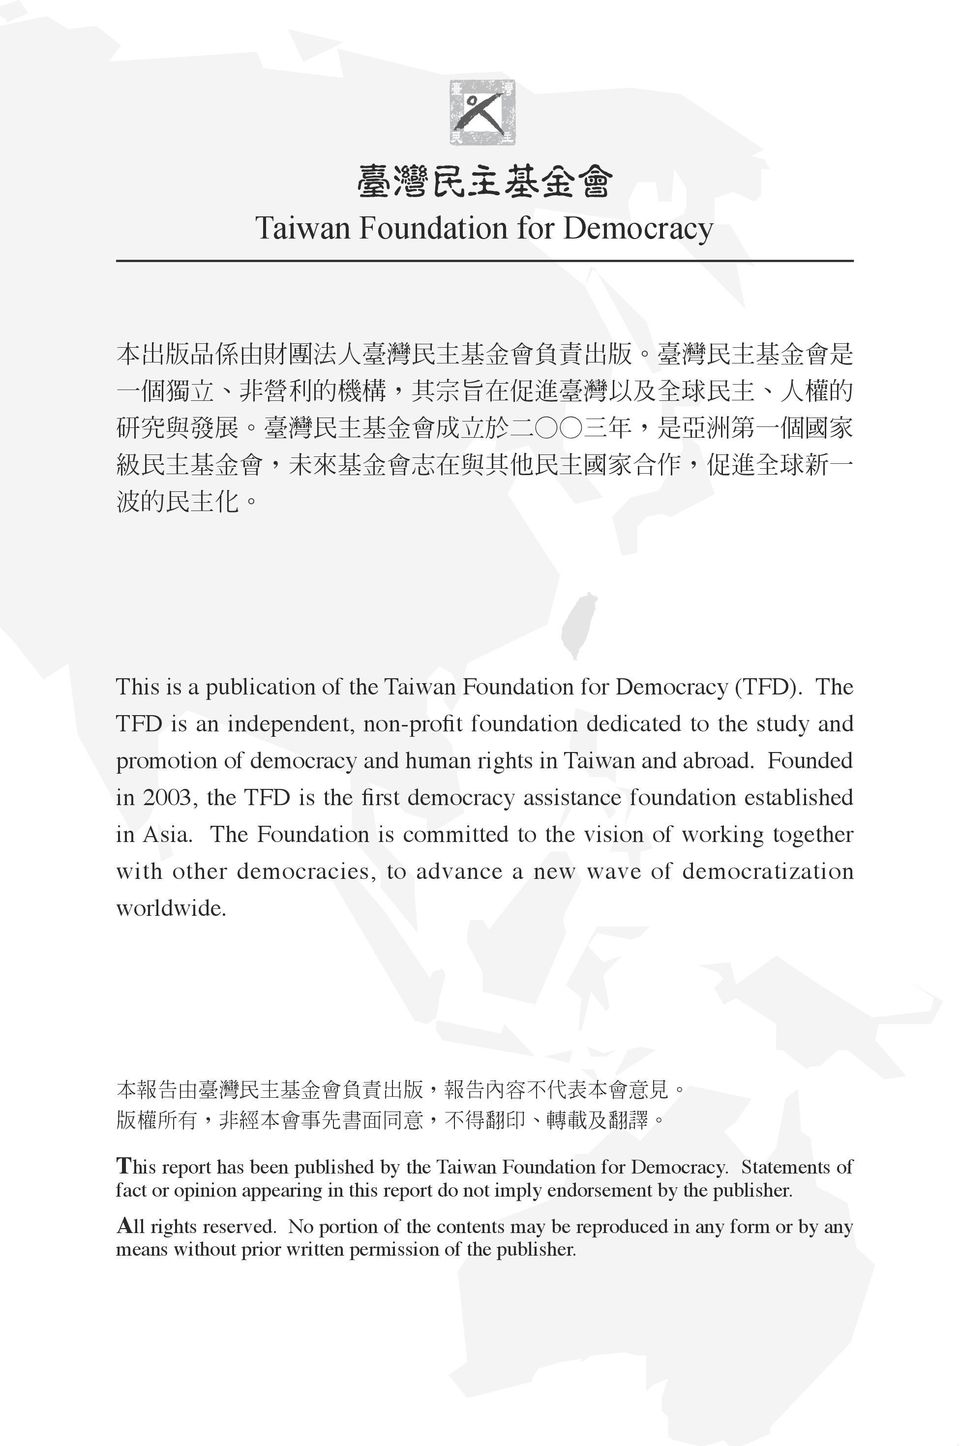 The TFD is an independent, non-profit foundation dedicated to the study and promotion of democracy and human rights in Taiwan and abroad.